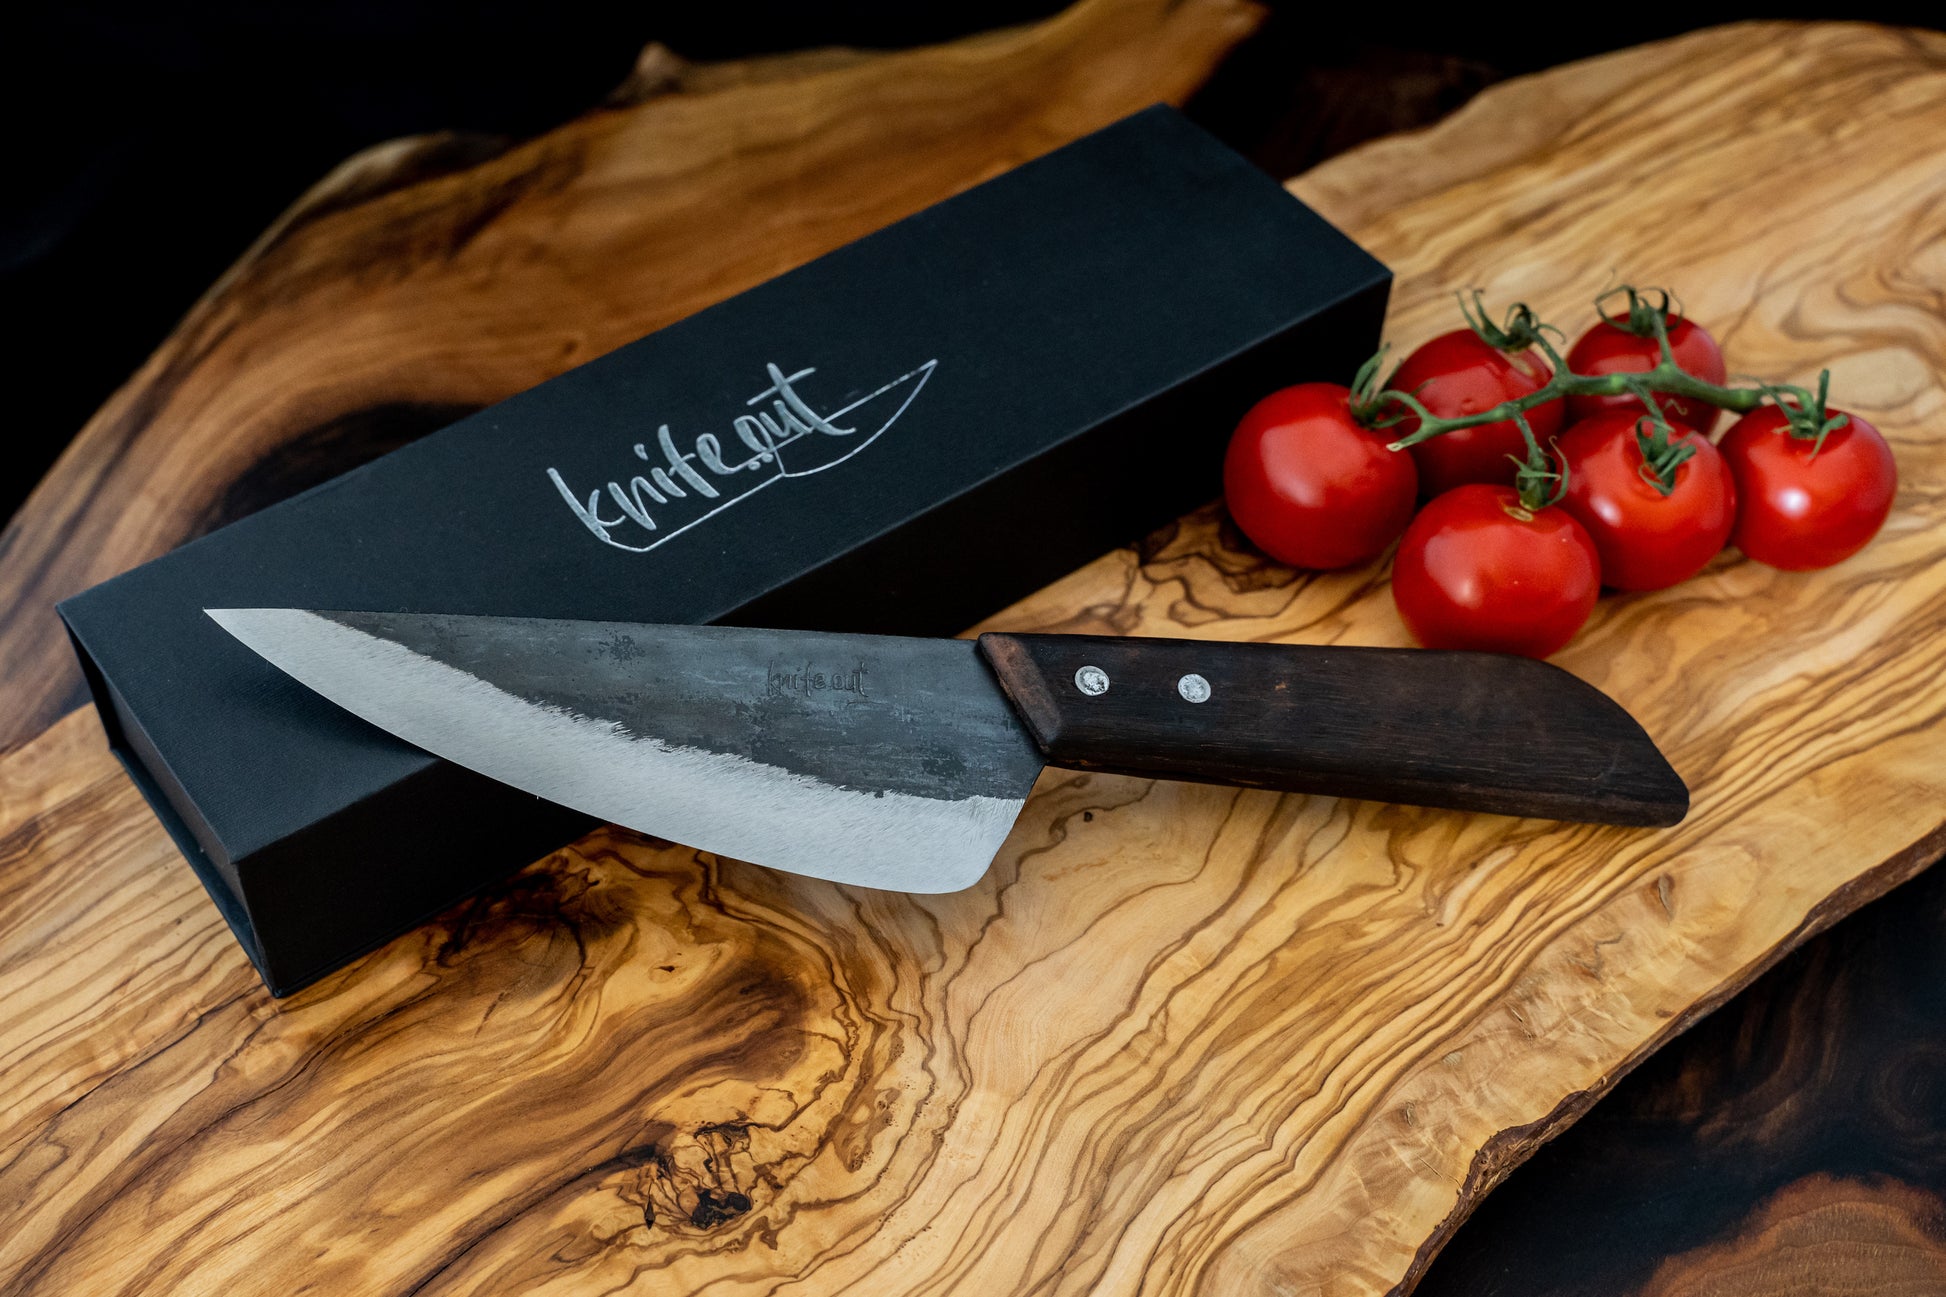 The Fins Rustic Carbon Steel Knife Range – Knife out